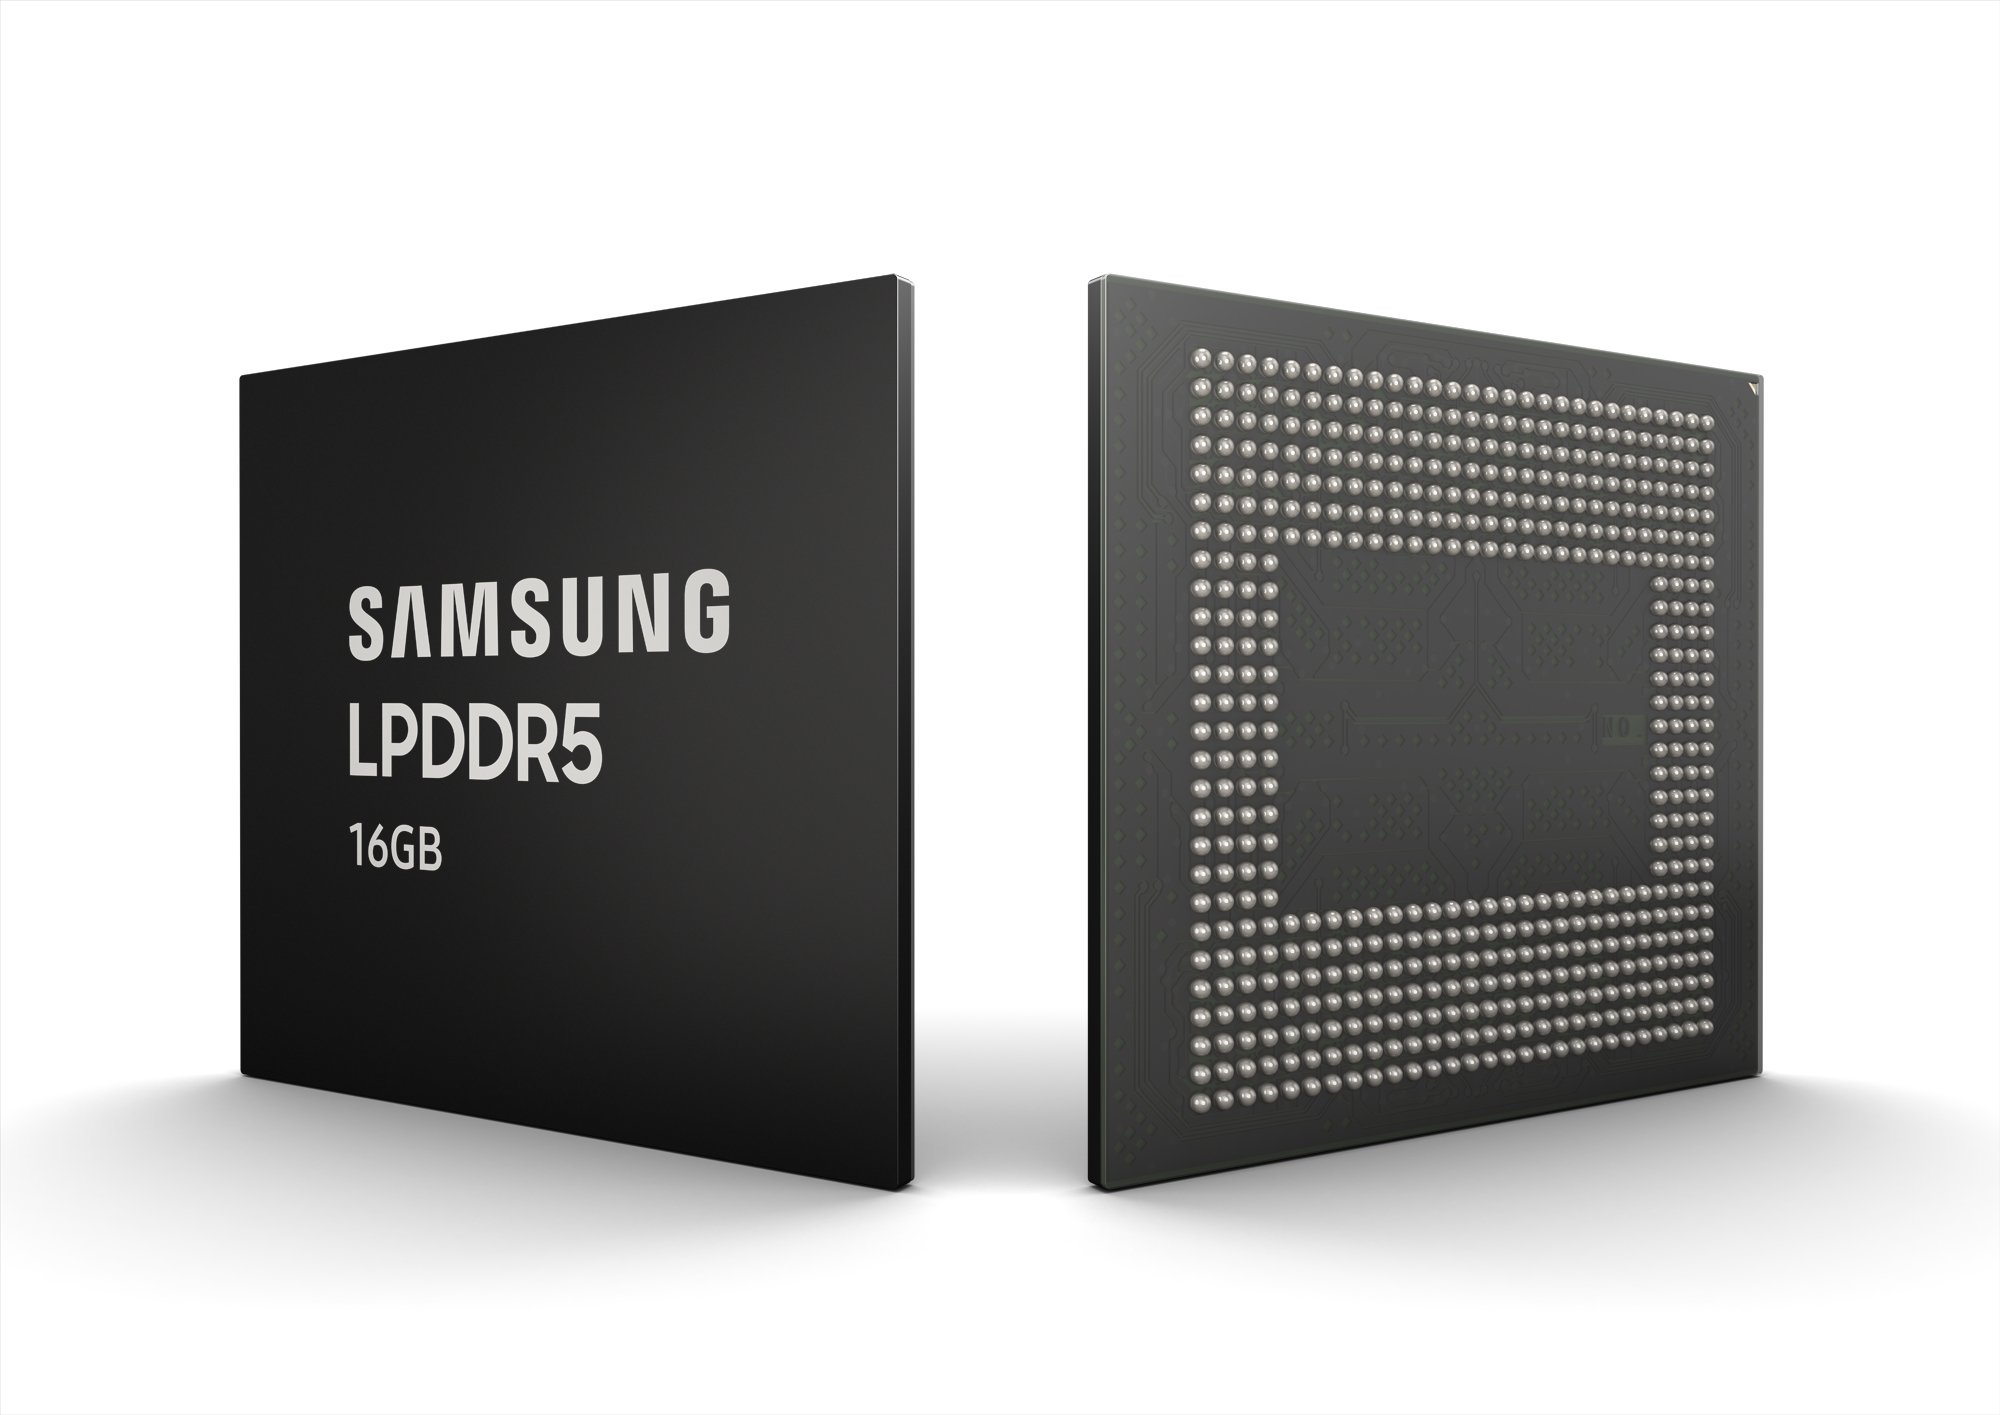 Samsung is the first to begin mass production of 16GB LPDDR5 DRAM thumbnail